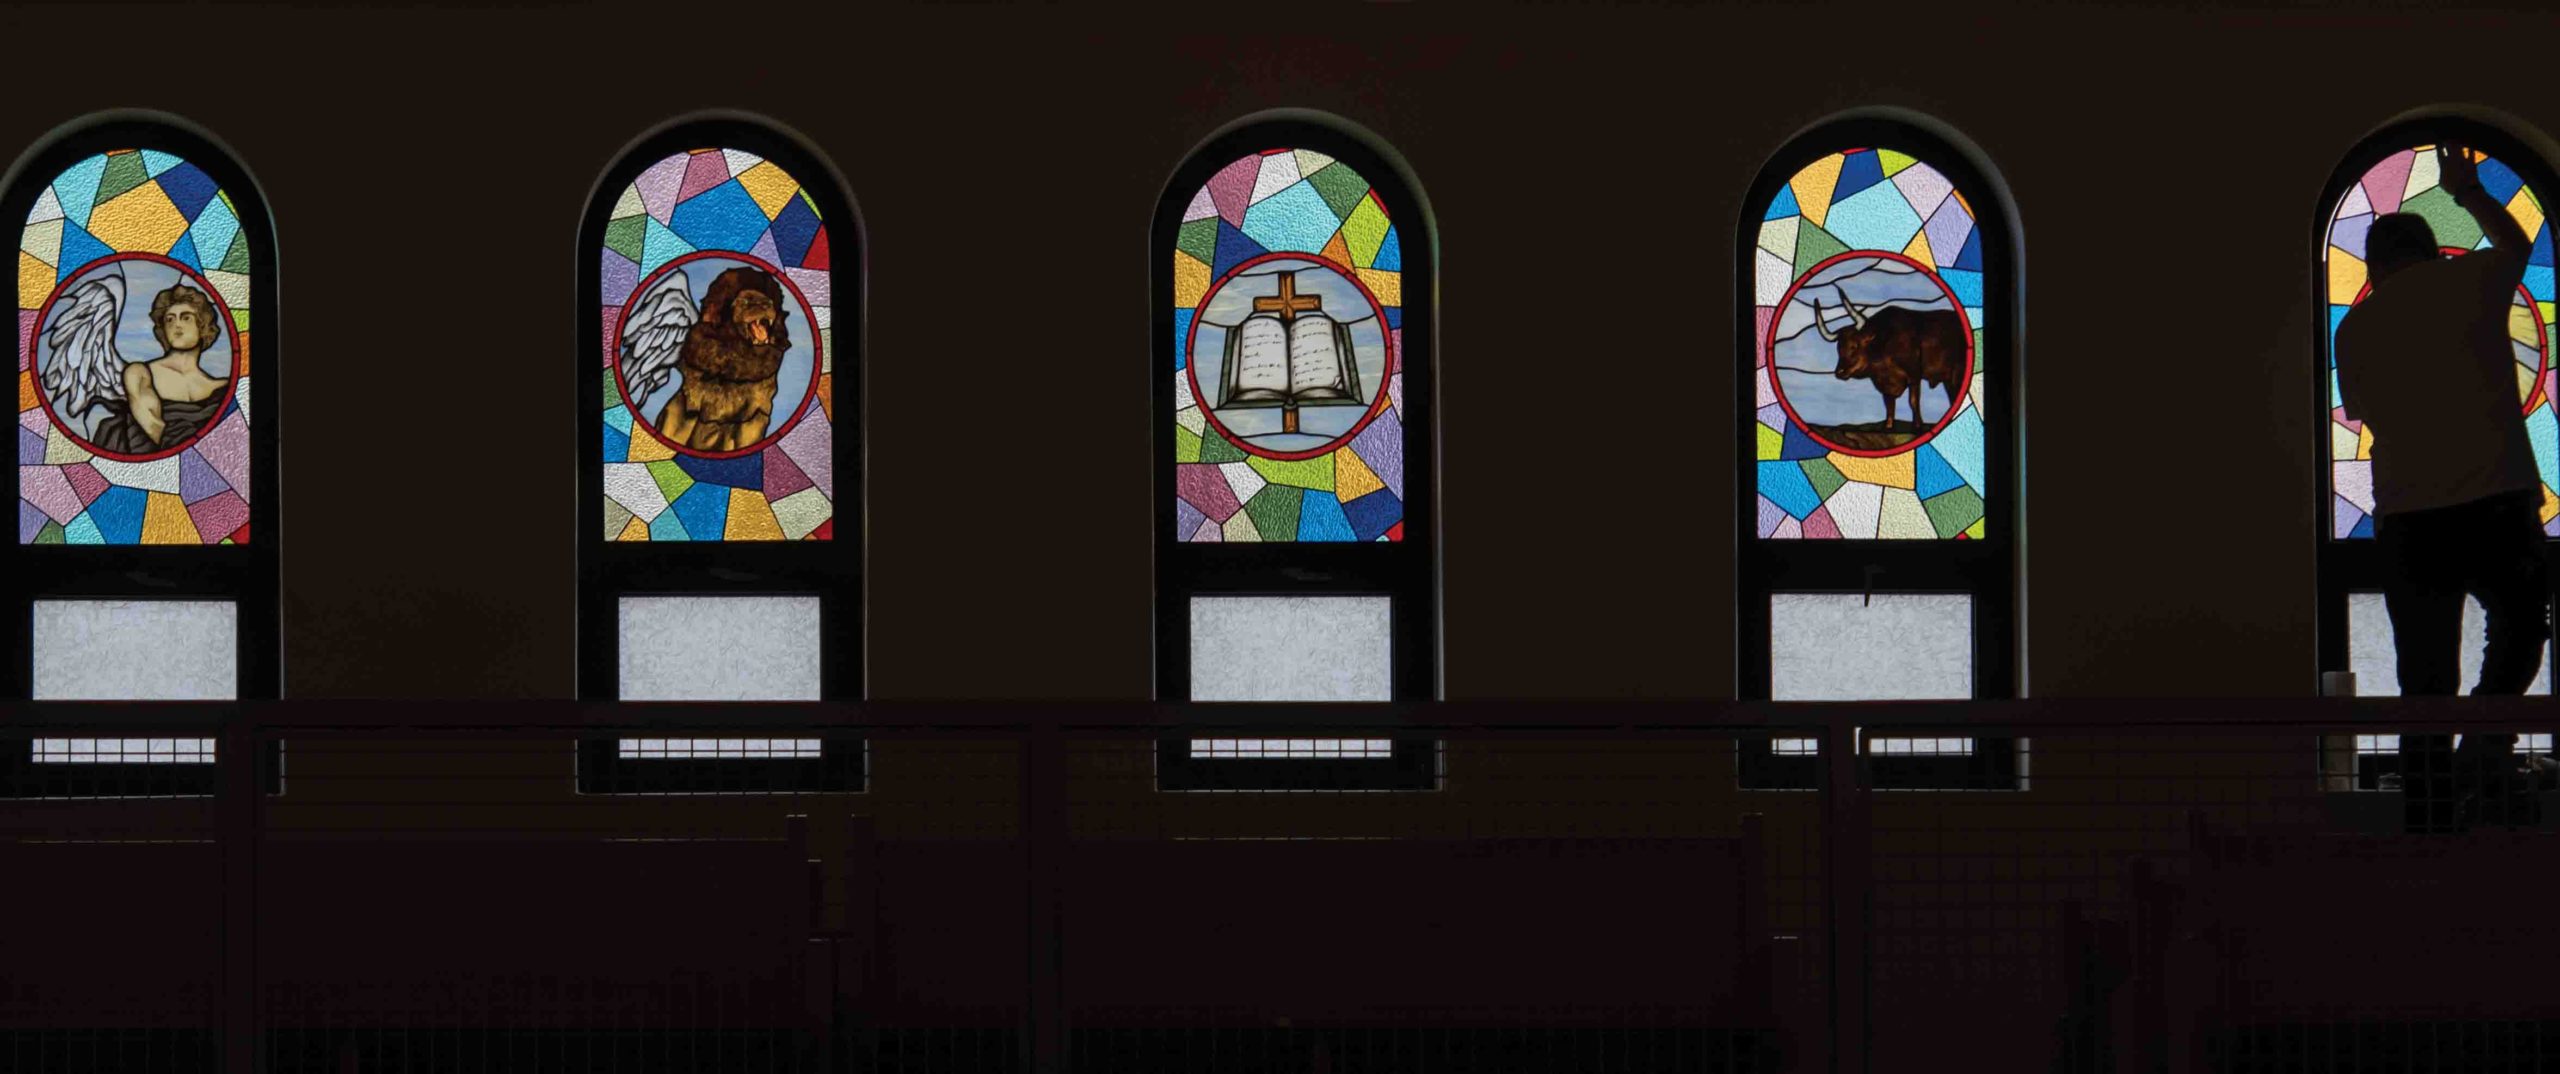 Brooklyn stained glass studio creates windows for Liberty Heights church